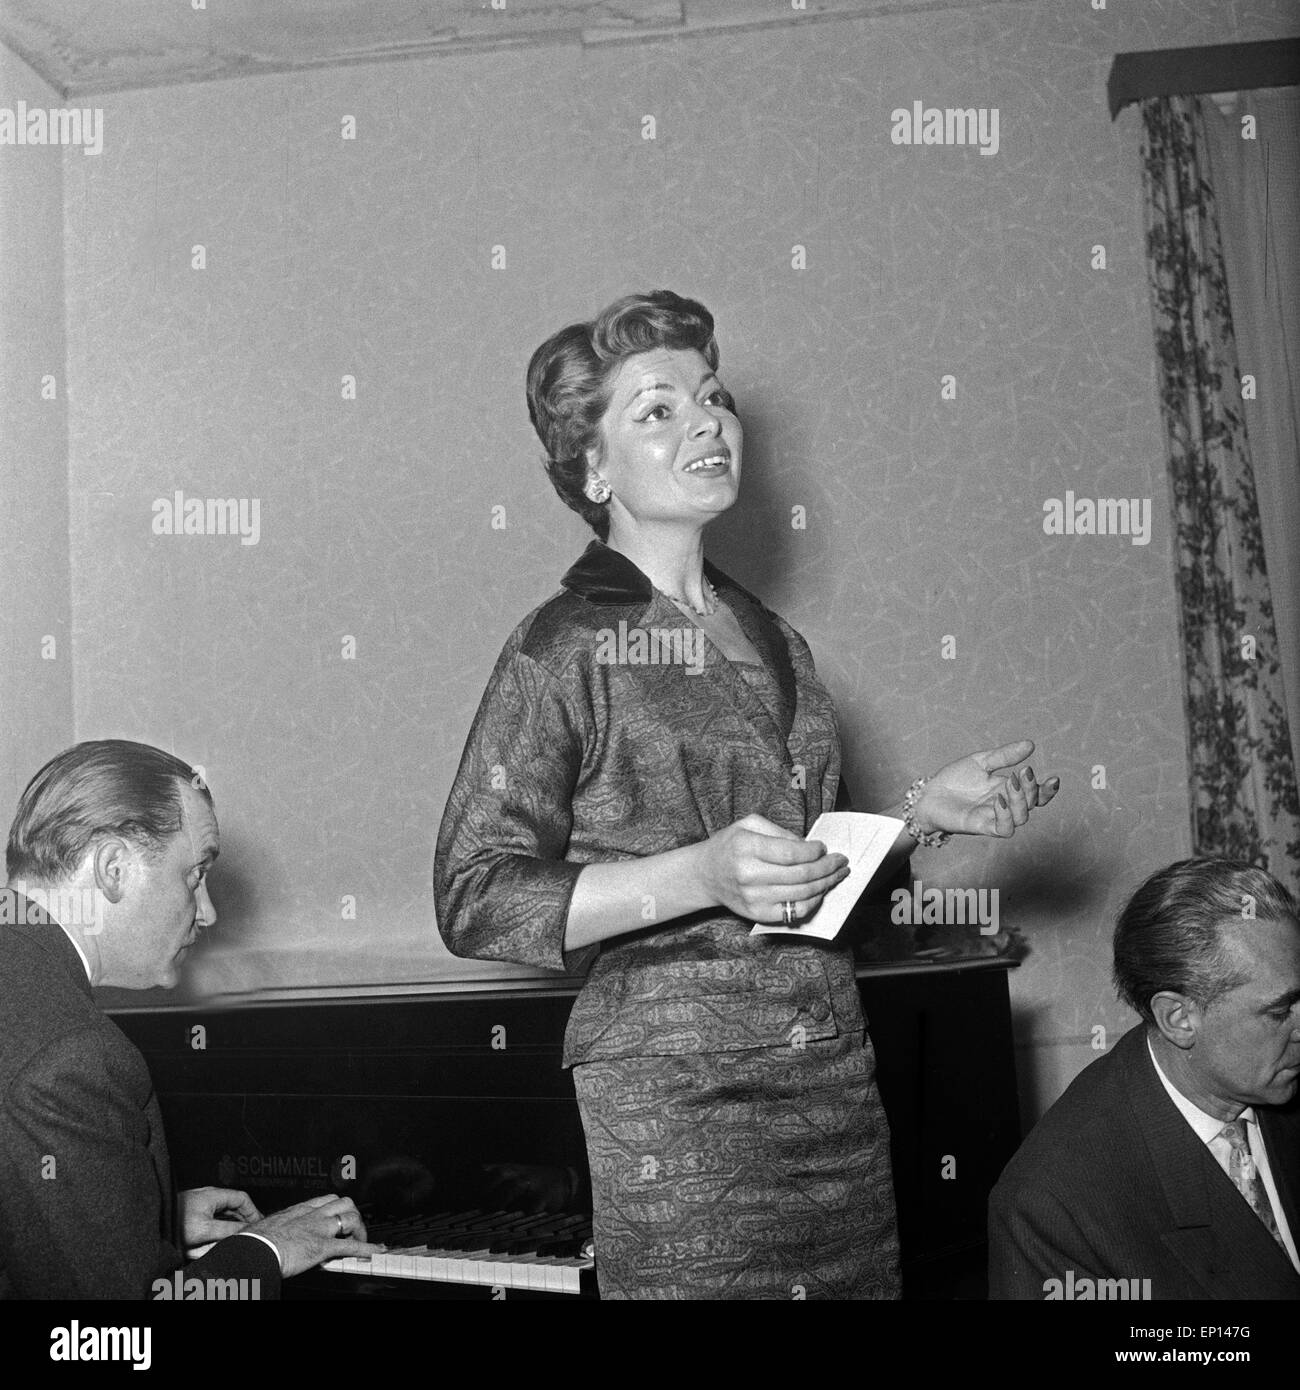 Swiss Singer Lys Assia High Resolution Stock Photography and Images - Alamy